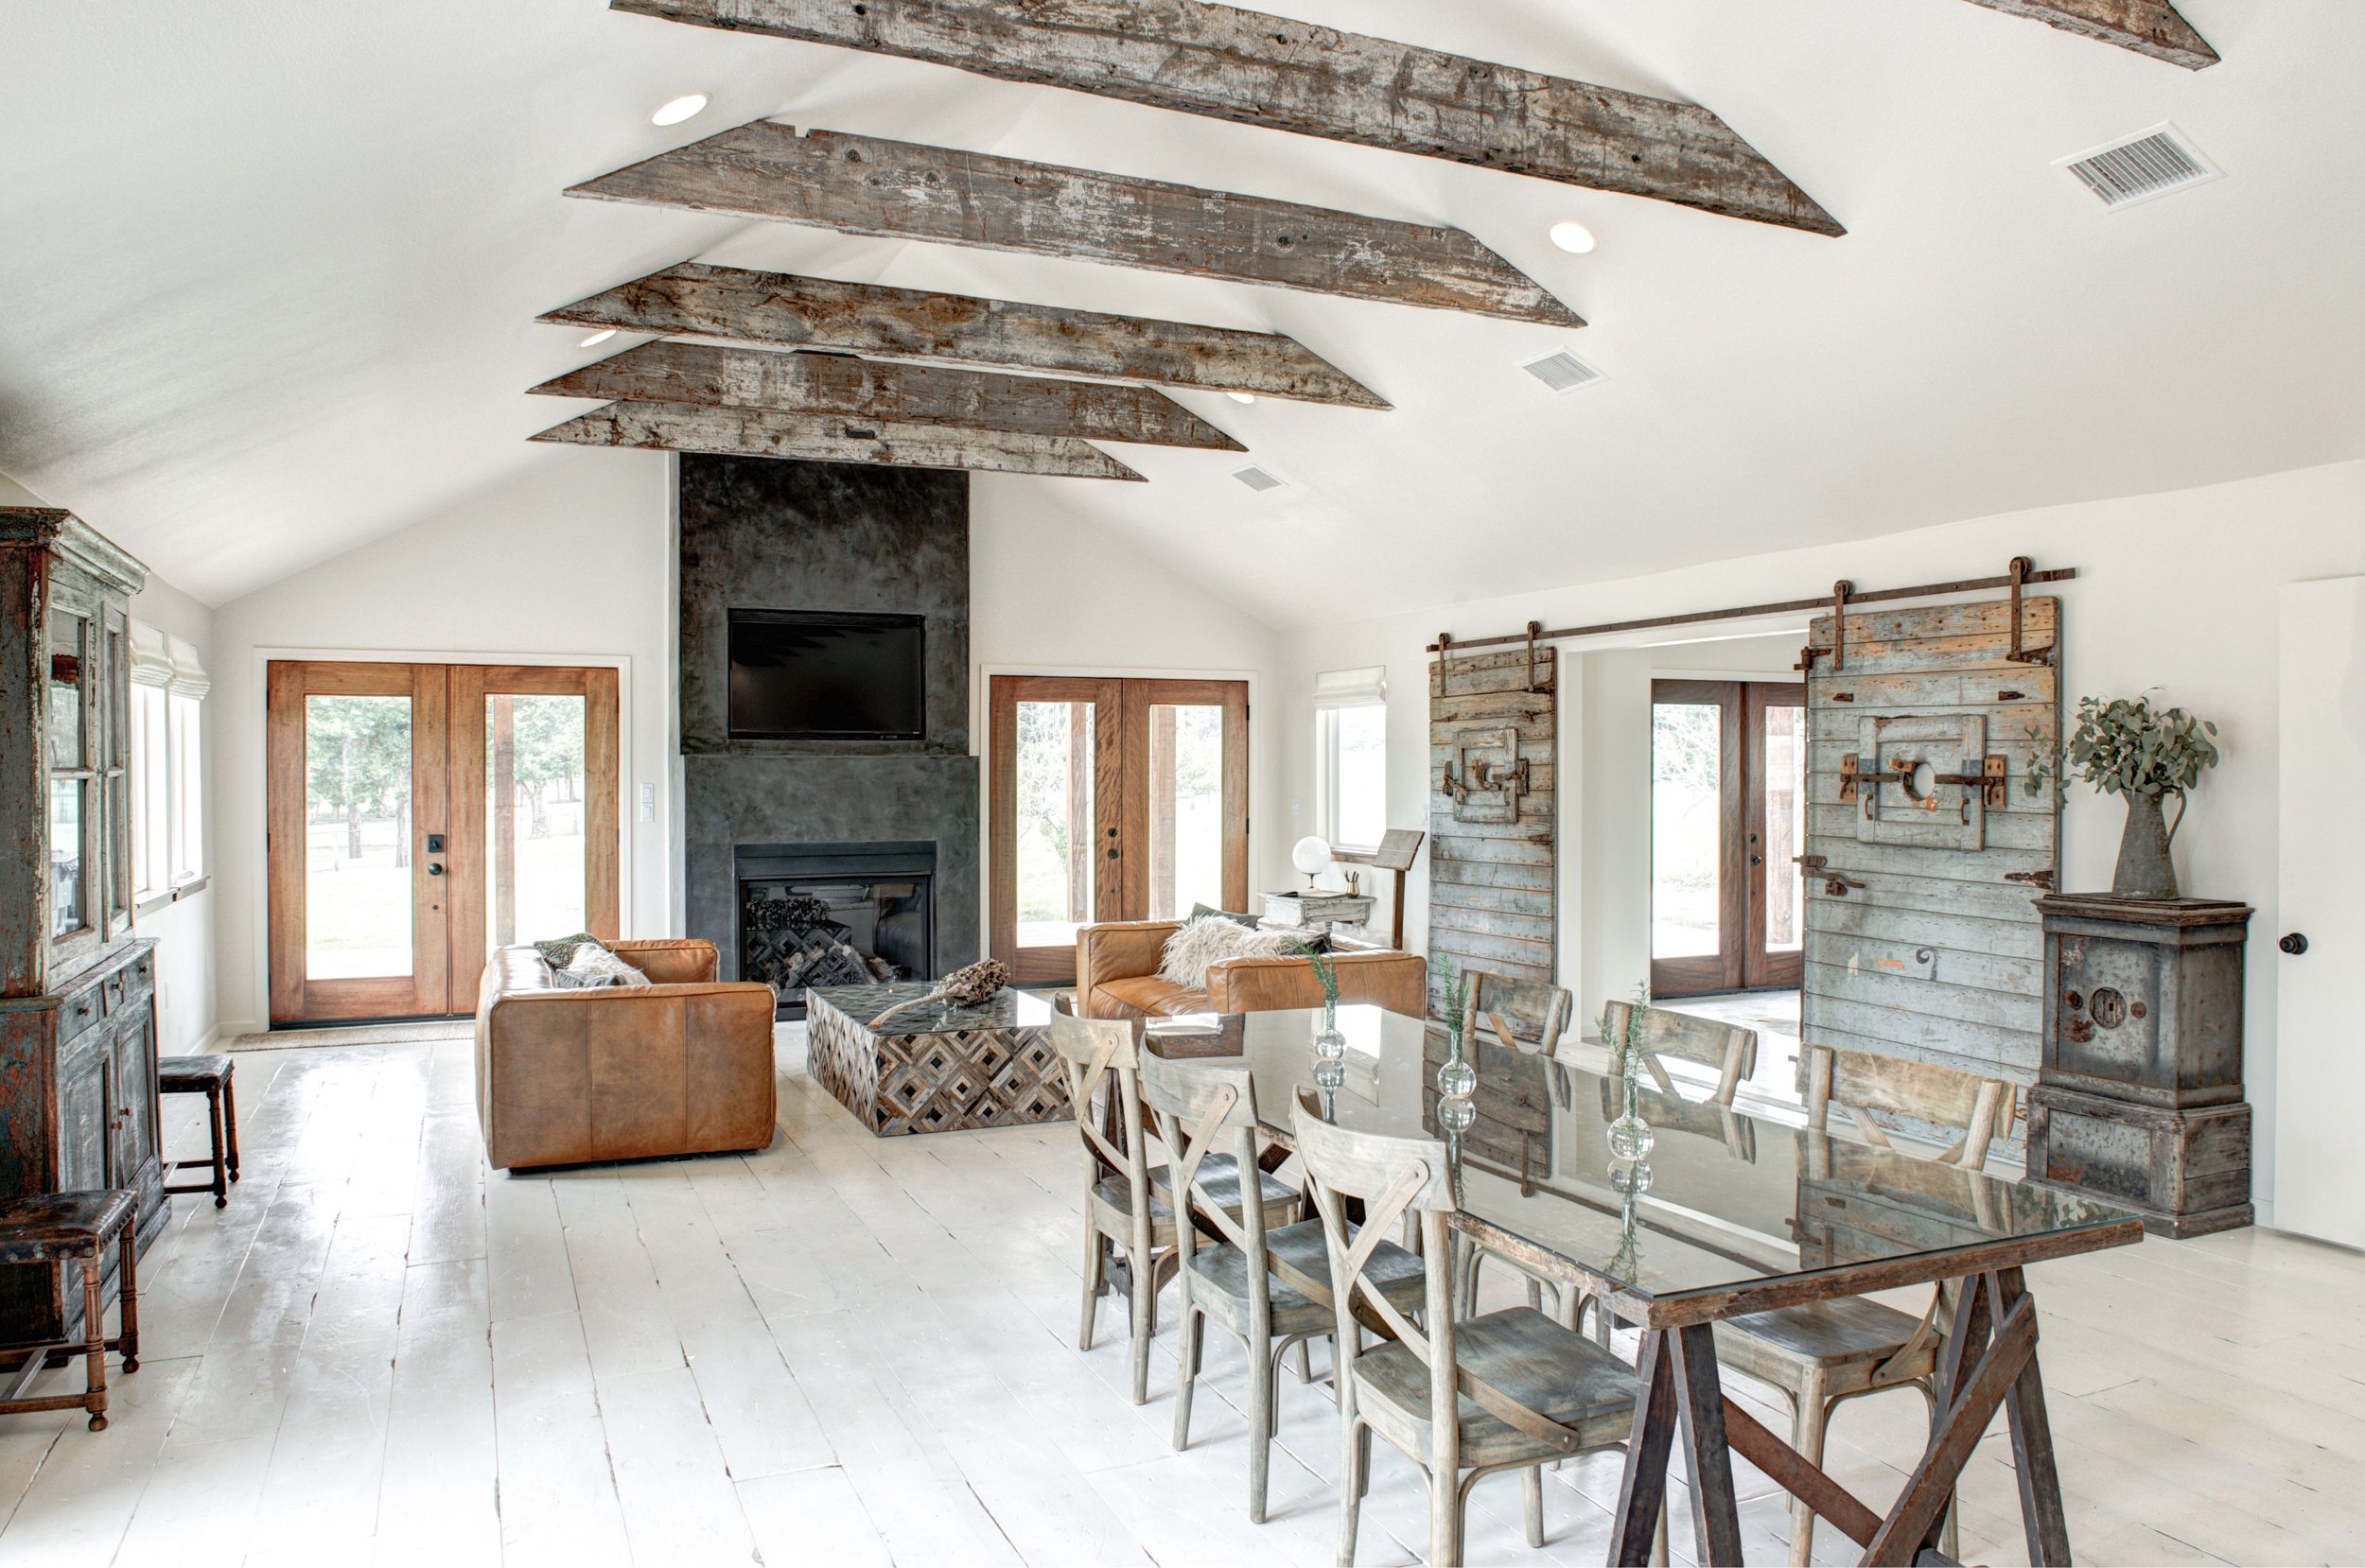   The 900-sq-ft Boho great room includes a gas fireplace and dining table for 8.  